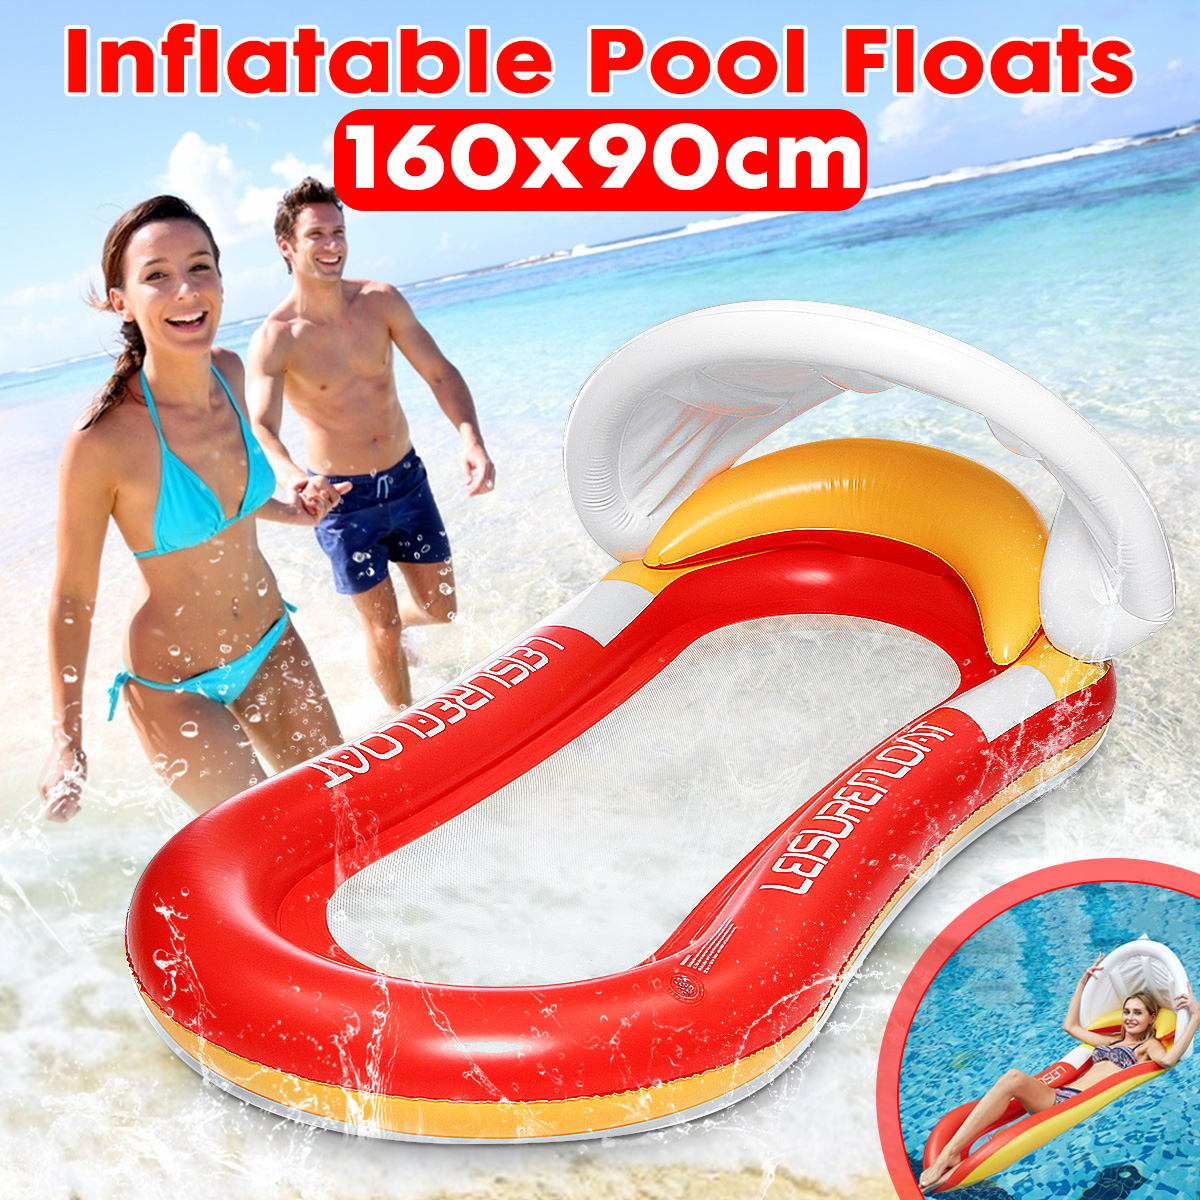 160x90cm-Inflatable-Float-Lounge-Inflatable-Chair-with-Headrest-Block-UV-Shading-Effect-Row-Raft-Out-1560819-1